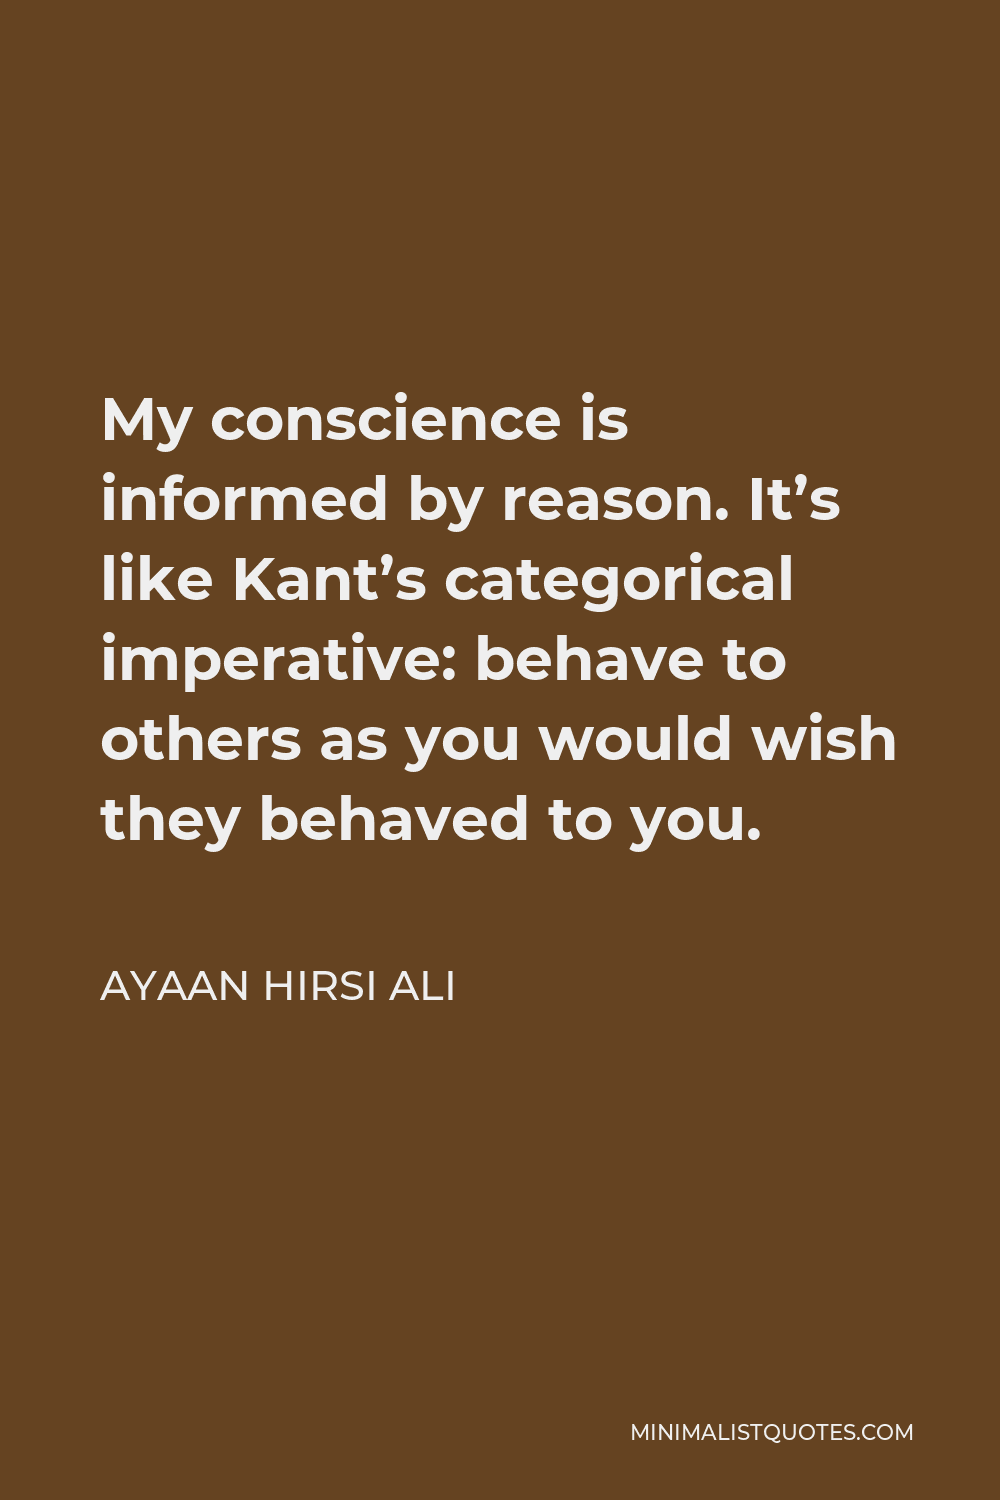 Ayaan Hirsi Ali Quote - My conscience is informed by reason. It’s like Kant’s categorical imperative: behave to others as you would wish they behaved to you.